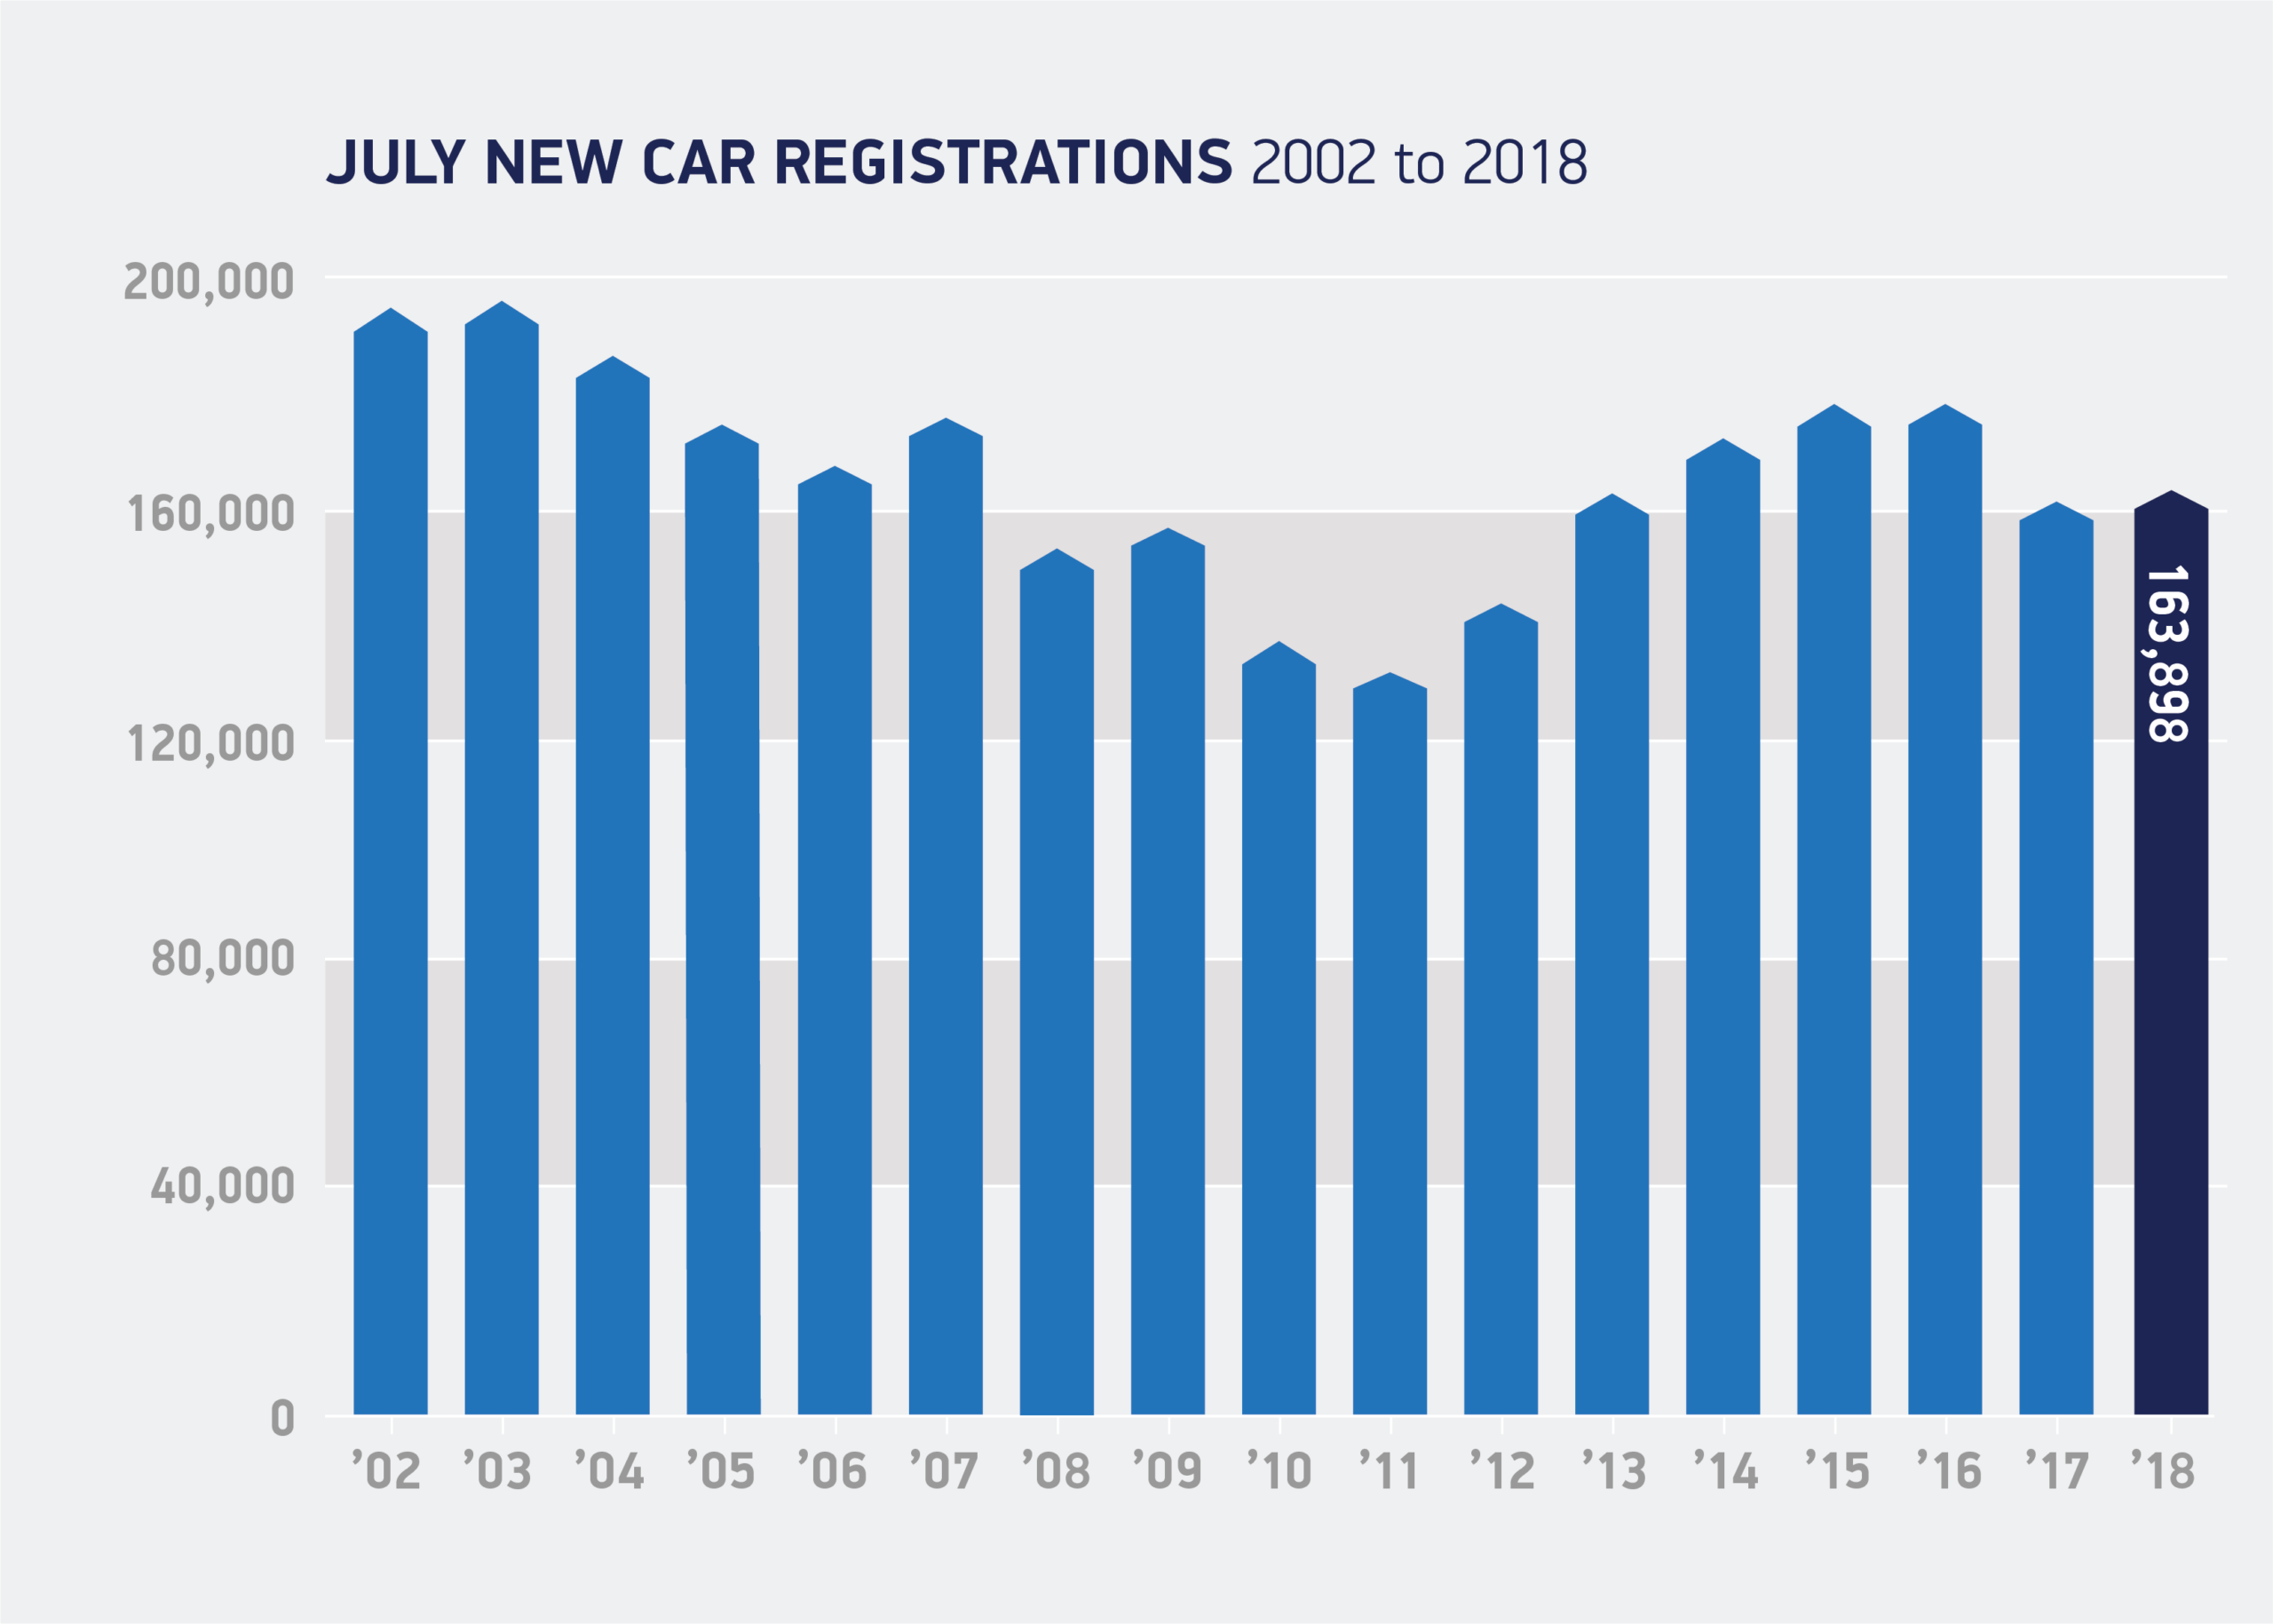 July registrations 2002 to 2018